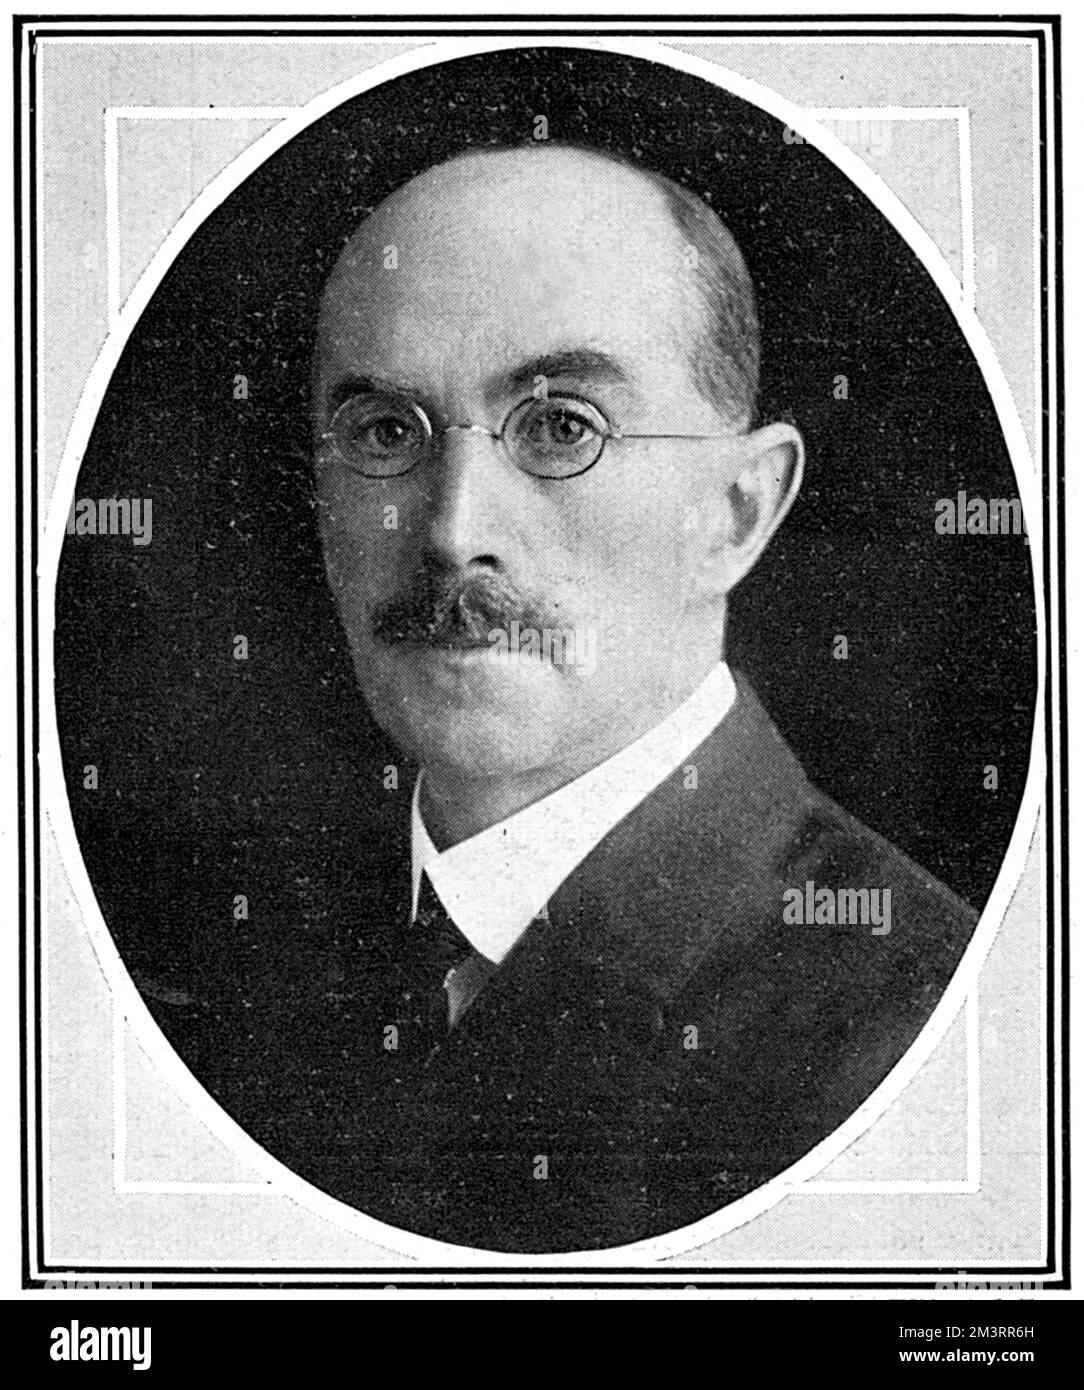 Mr. W. A. Robinson, C.B,. Air Council Secretary in 1918 for the newly-formed Royal Air Force.  Previously Assistant Secretary of H.M. Office of Works, after some years spent in the Colonial Office where he became Secretary to the Dominions Royal Commission.  He had a distinguished university career, being a Scholar of Queen's College, Oxford, then taken first place in the Civil Service Examination.       Date: 1918 Stock Photo